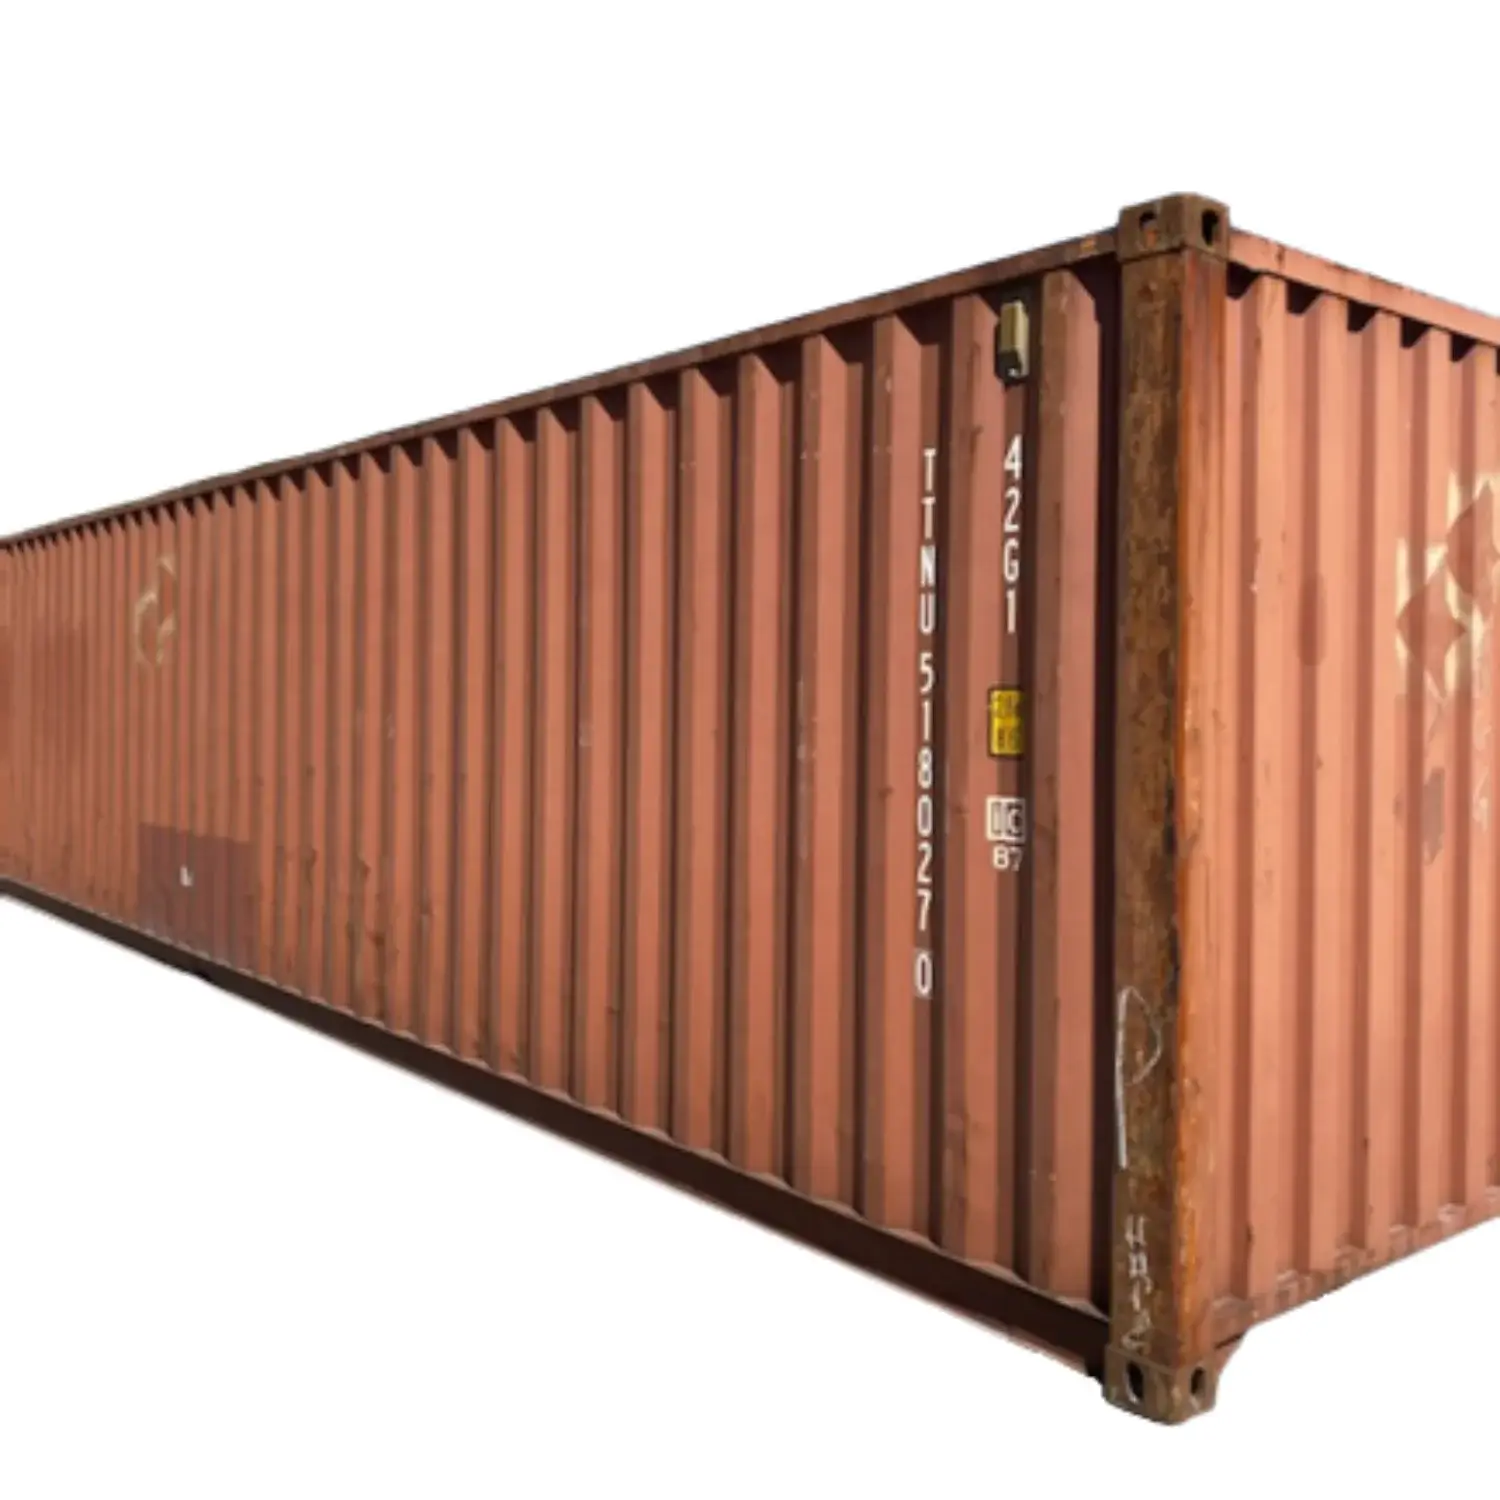 https://onsite-cdn.sfo3.cdn.digitaloceanspaces.com/wp-content/uploads/2022/02/31073542/used-40ft-shipping-containers-for-sale.webp